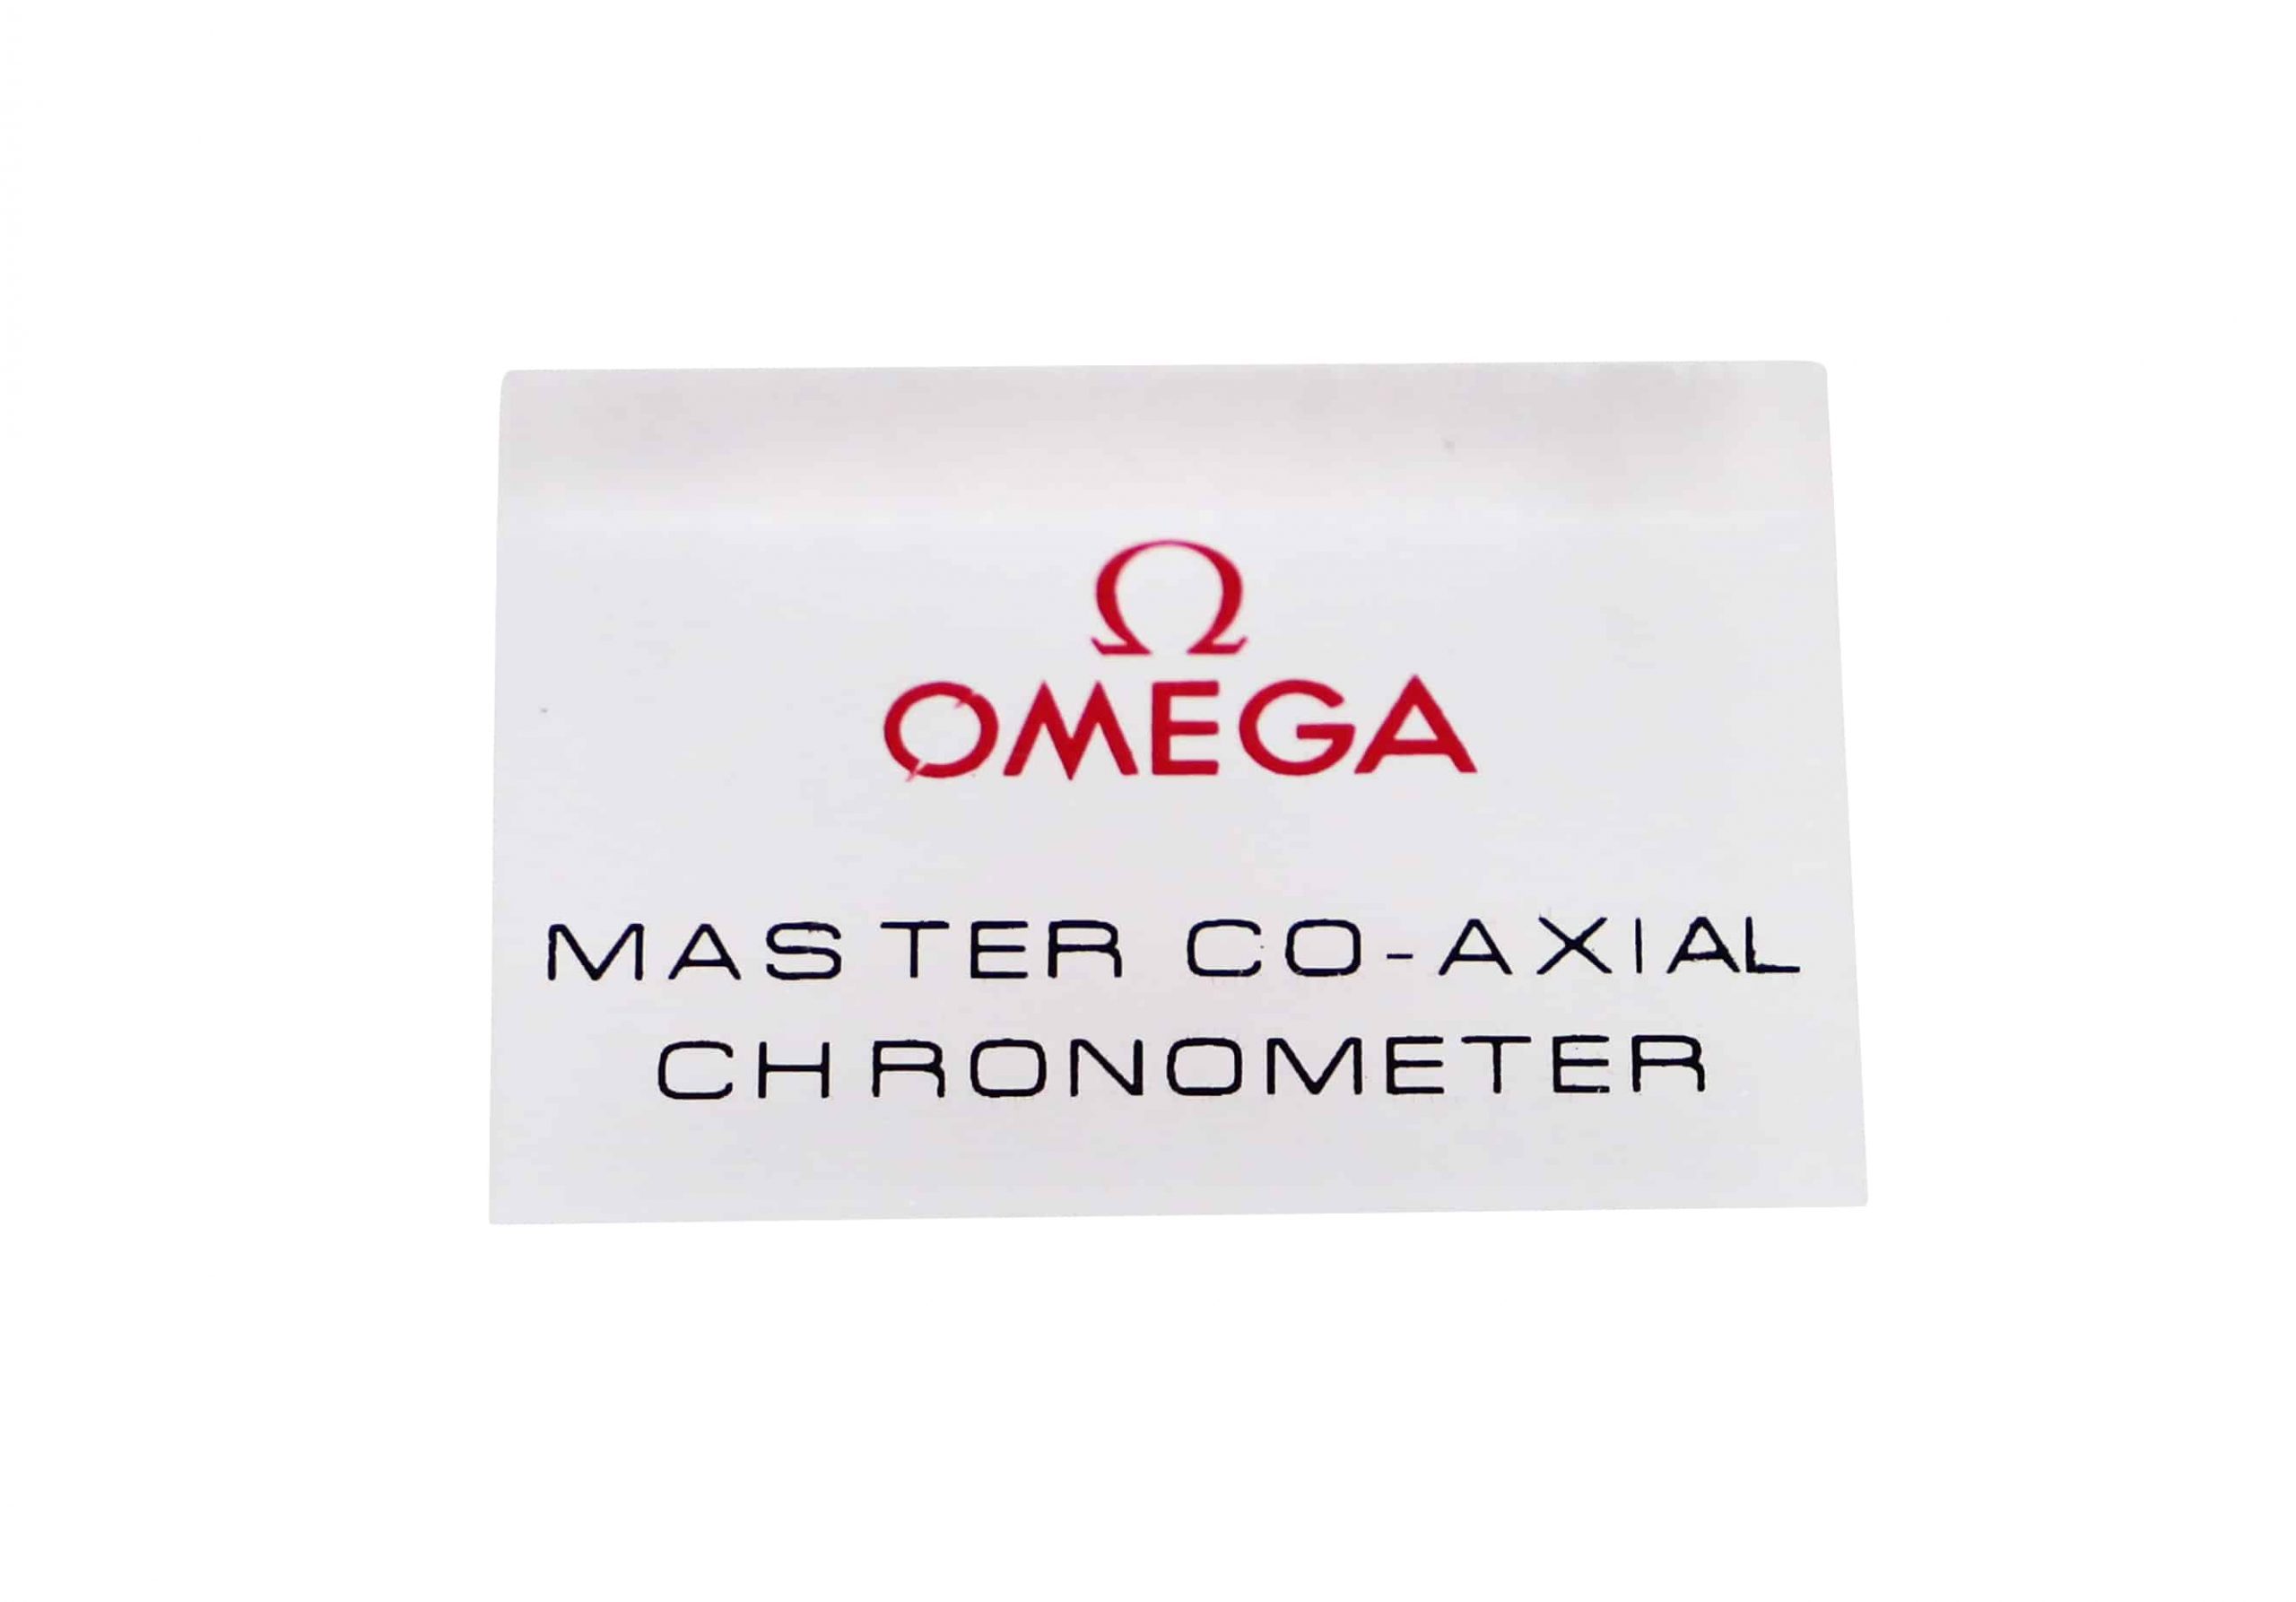 Omega Master Co-Axial Chronometer Display Sign - Rare Watch Parts